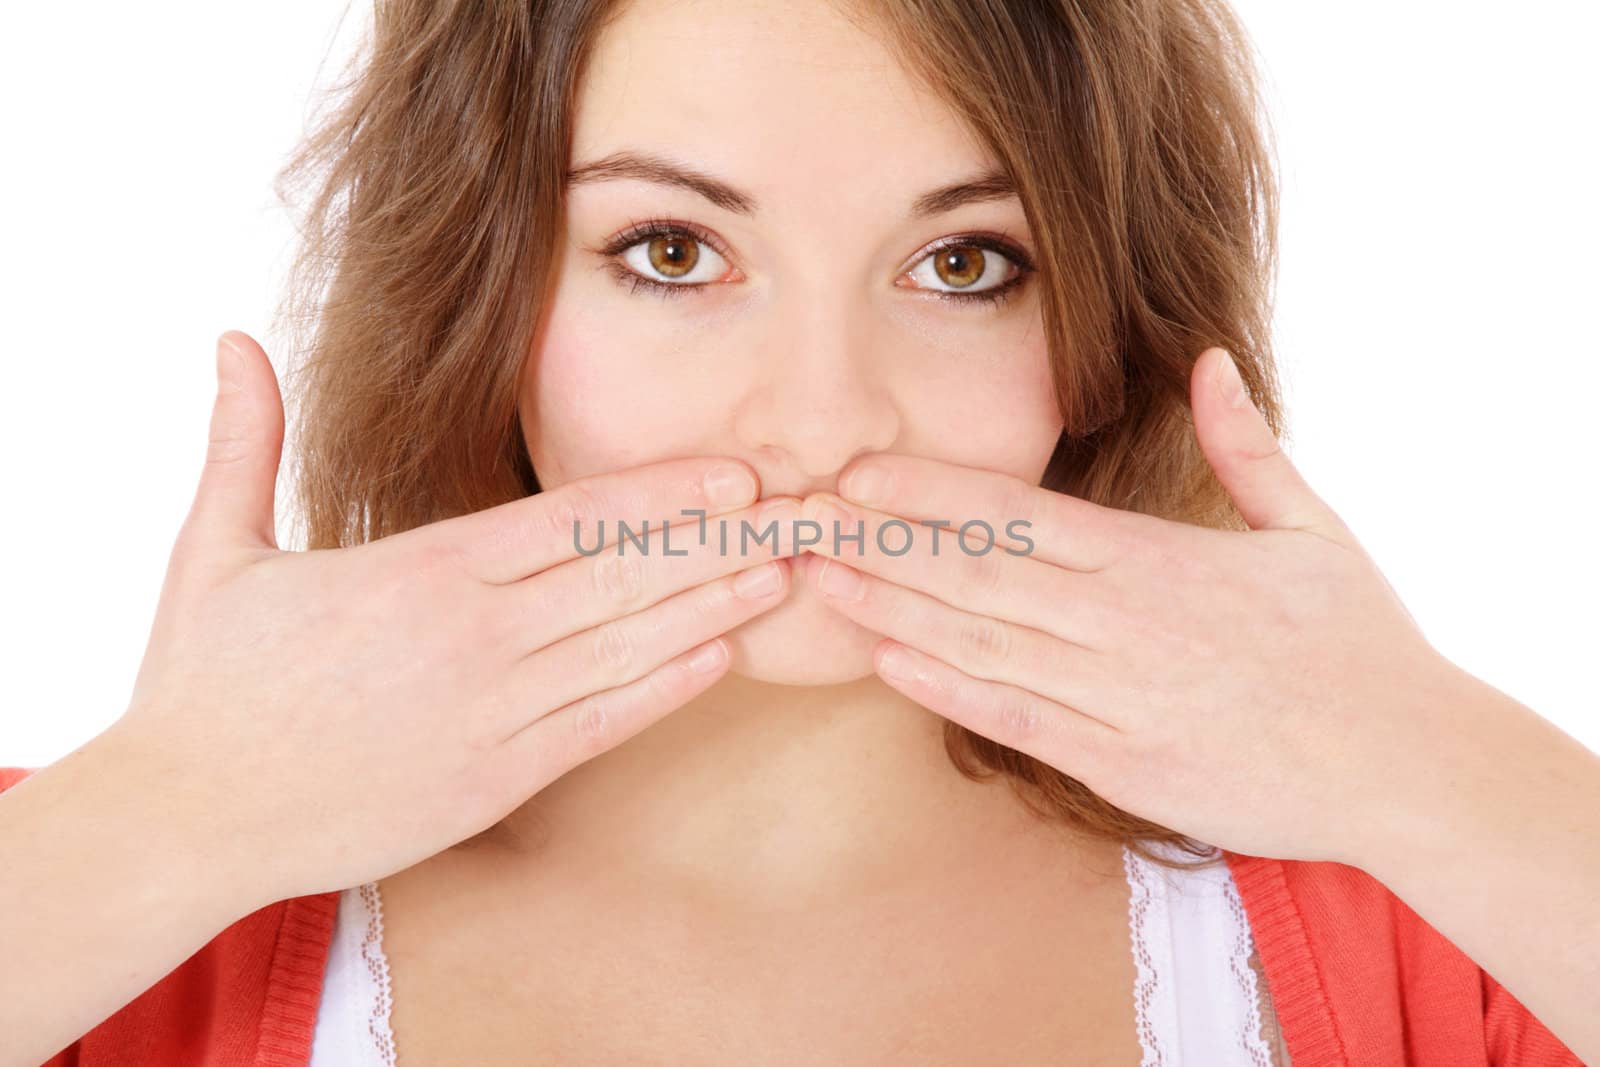 Attractive young woman keeping her mouth shut. All on white background.